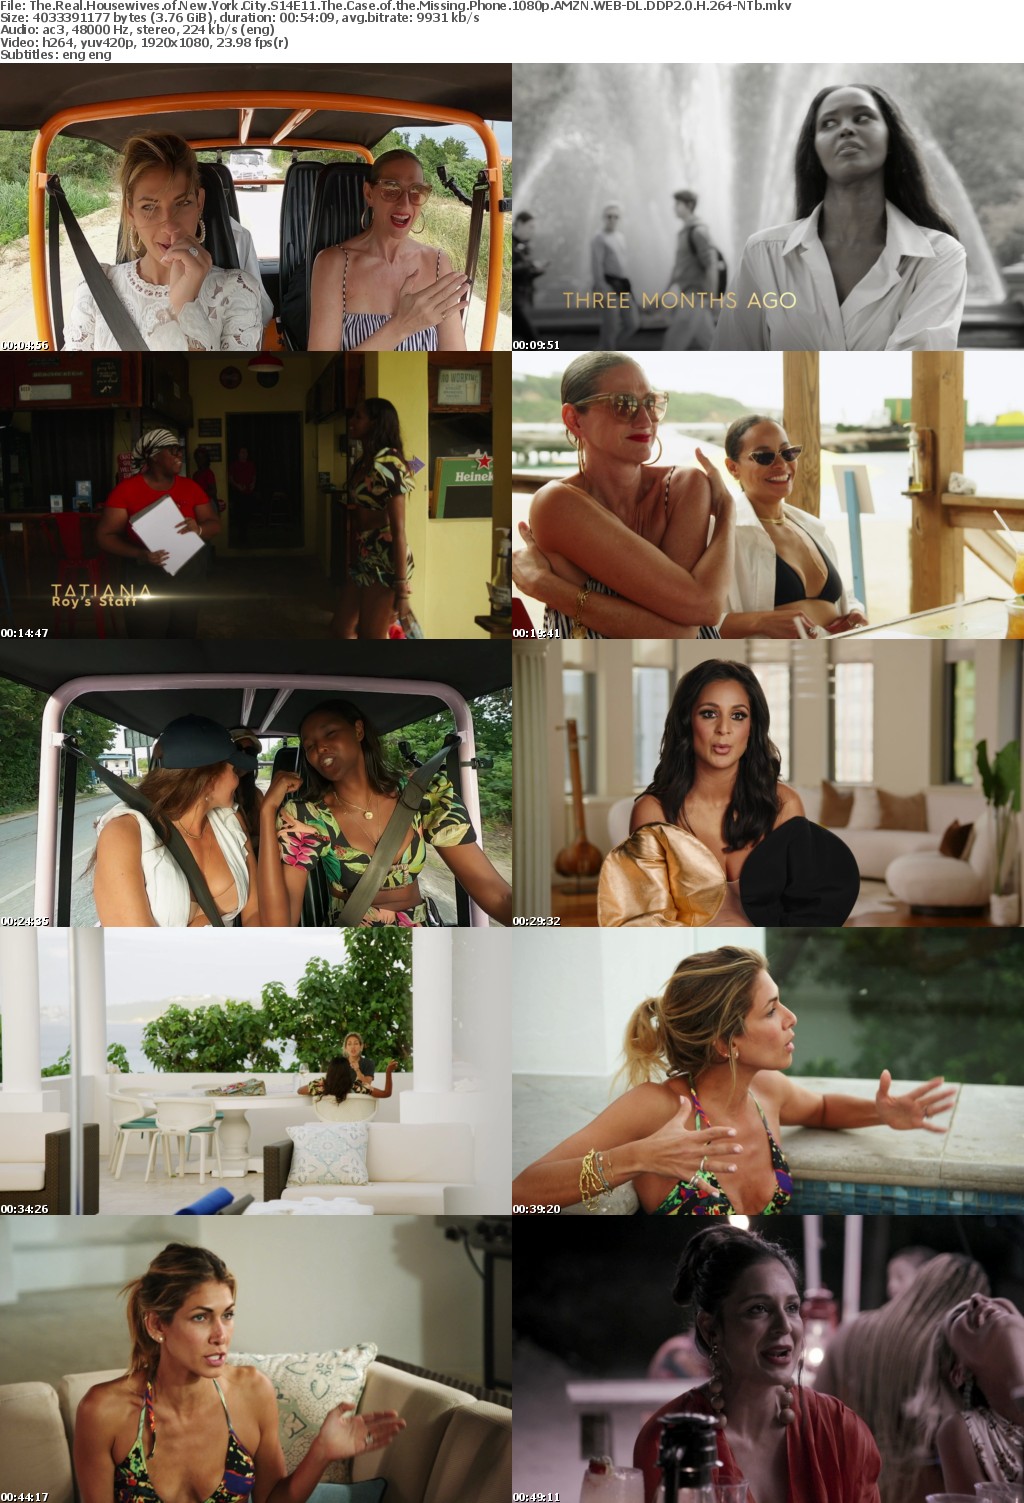 The Real Housewives of New York City S14E11 The Case of the Missing Phone 1080p AMZN WEB-DL DDP2 0 H 264-NTb